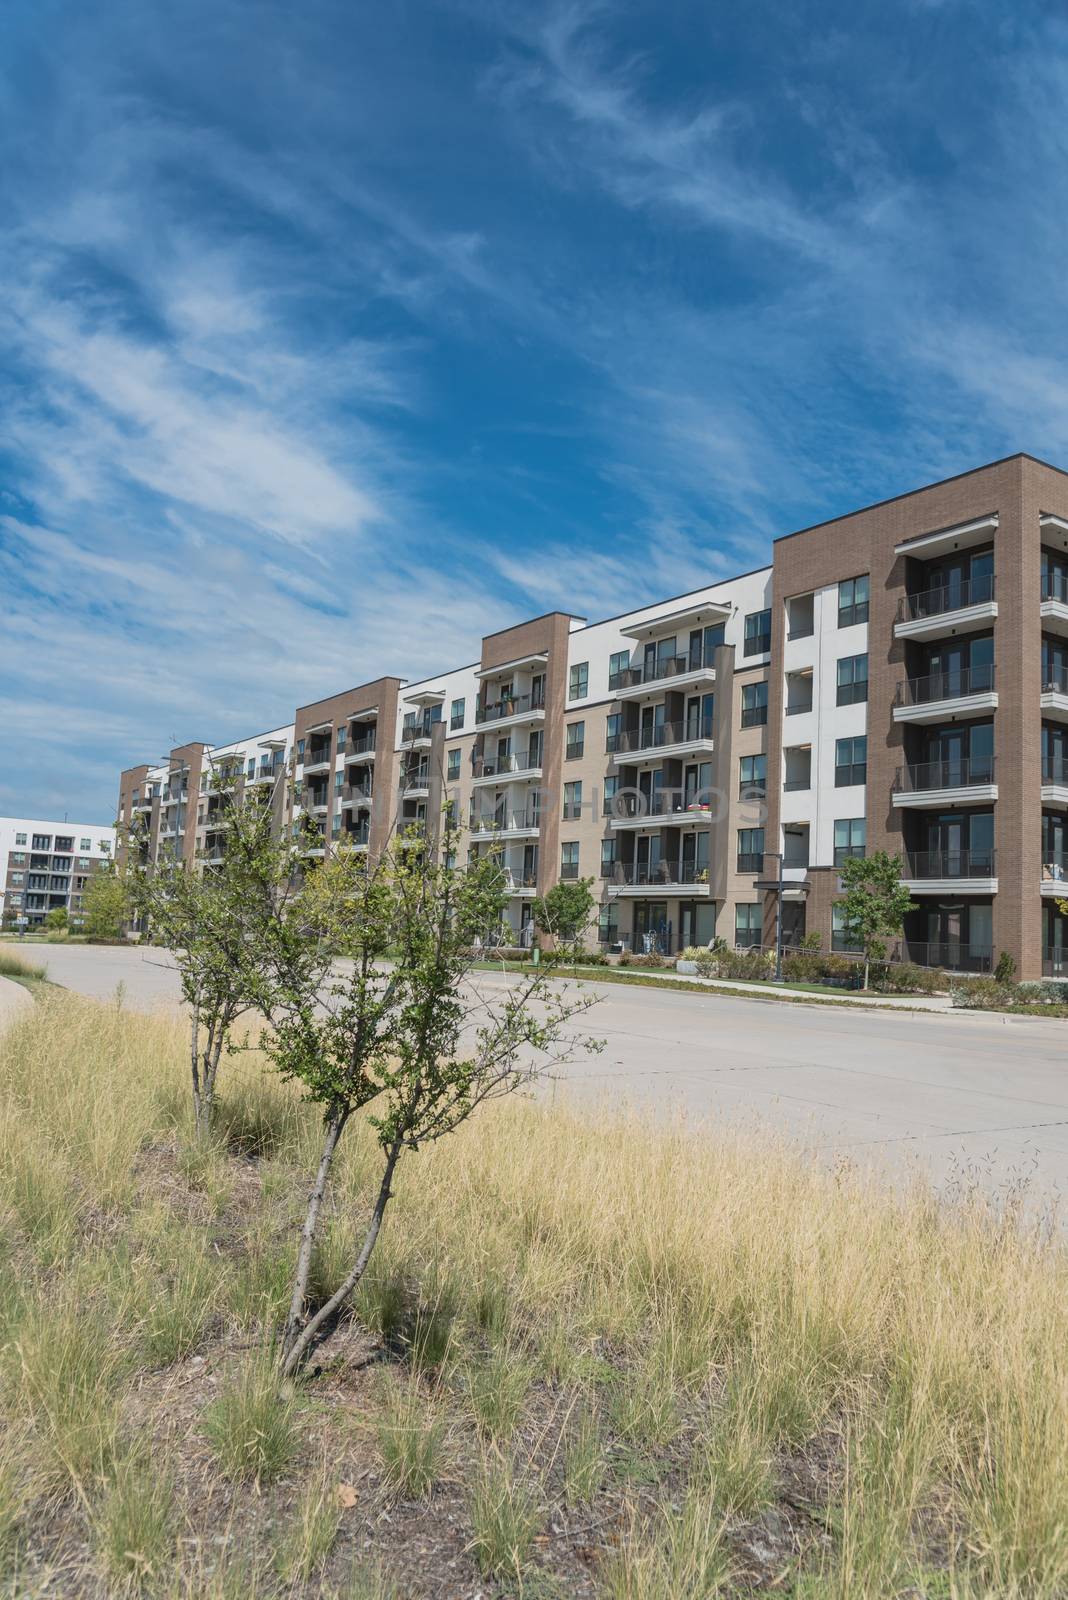 Row of apartment buildings near street in suburbs area of Dallas, Texas, USA. Multi-Storey flat unit, group housing complex condos for modern living style